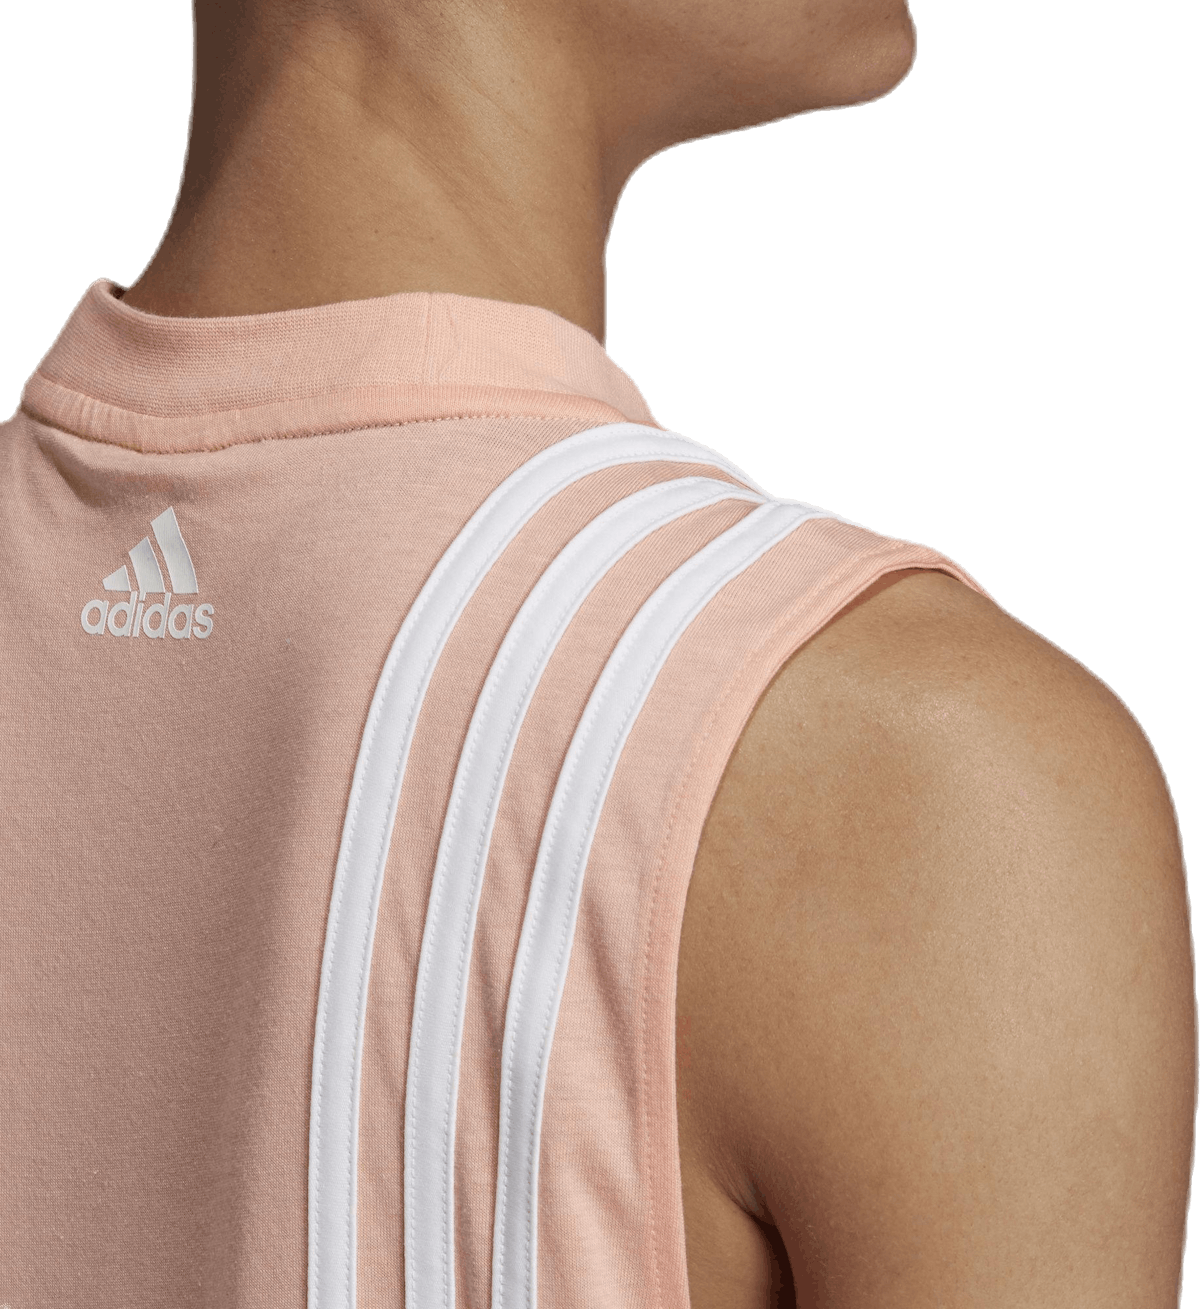 Must Haves 3-Stripes Tank Top Pink